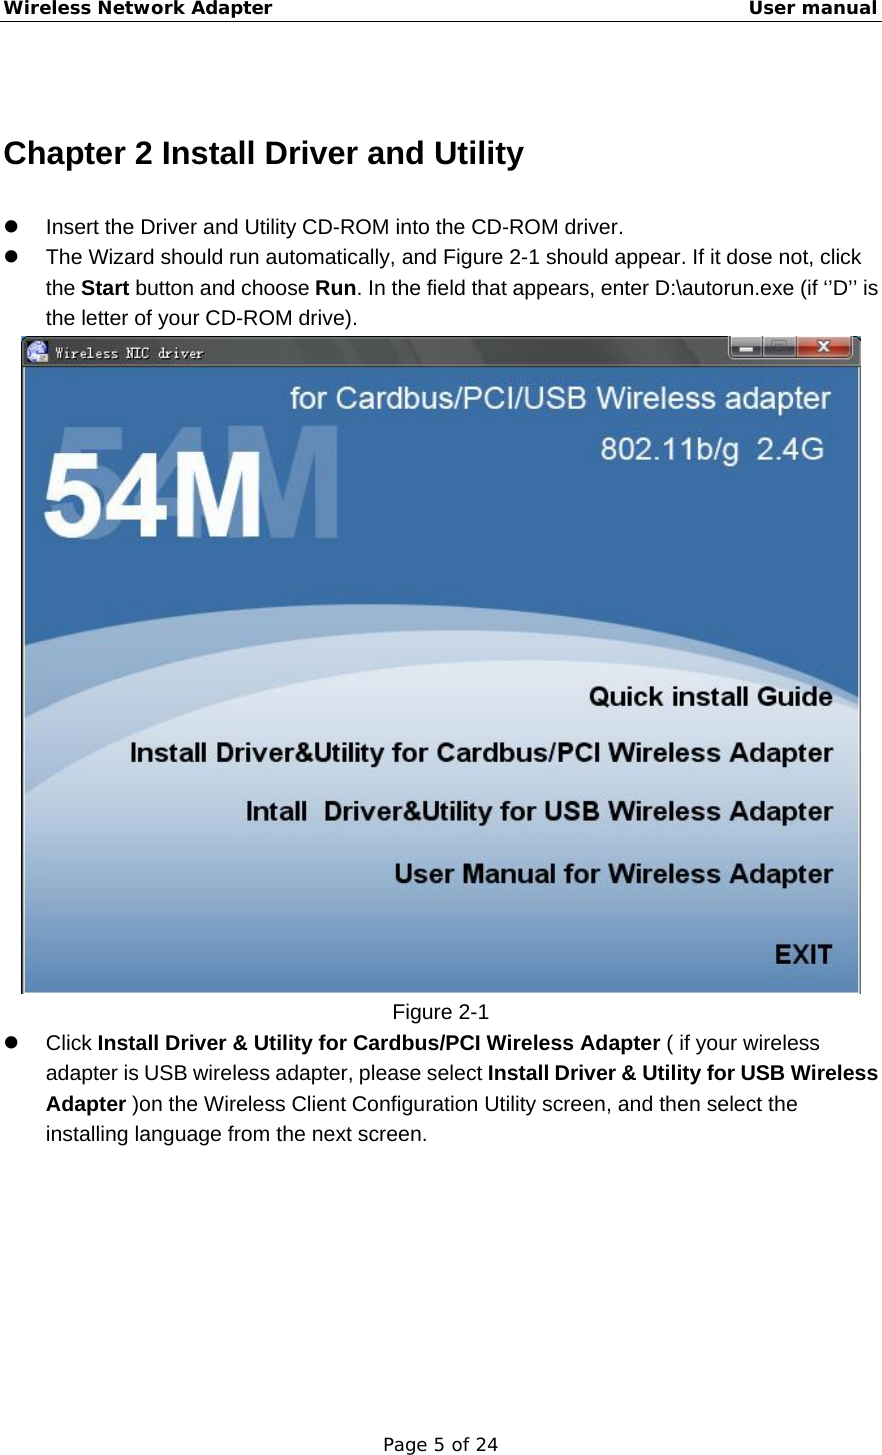 Wireless Network Adapter                                                    User manual Page 5 of 24  Chapter 2 Install Driver and Utility z  Insert the Driver and Utility CD-ROM into the CD-ROM driver. z  The Wizard should run automatically, and Figure 2-1 should appear. If it dose not, click the Start button and choose Run. In the field that appears, enter D:\autorun.exe (if ‘’D’’ is the letter of your CD-ROM drive).  Figure 2-1 z Click Install Driver &amp; Utility for Cardbus/PCI Wireless Adapter ( if your wireless adapter is USB wireless adapter, please select Install Driver &amp; Utility for USB Wireless Adapter )on the Wireless Client Configuration Utility screen, and then select the installing language from the next screen. 